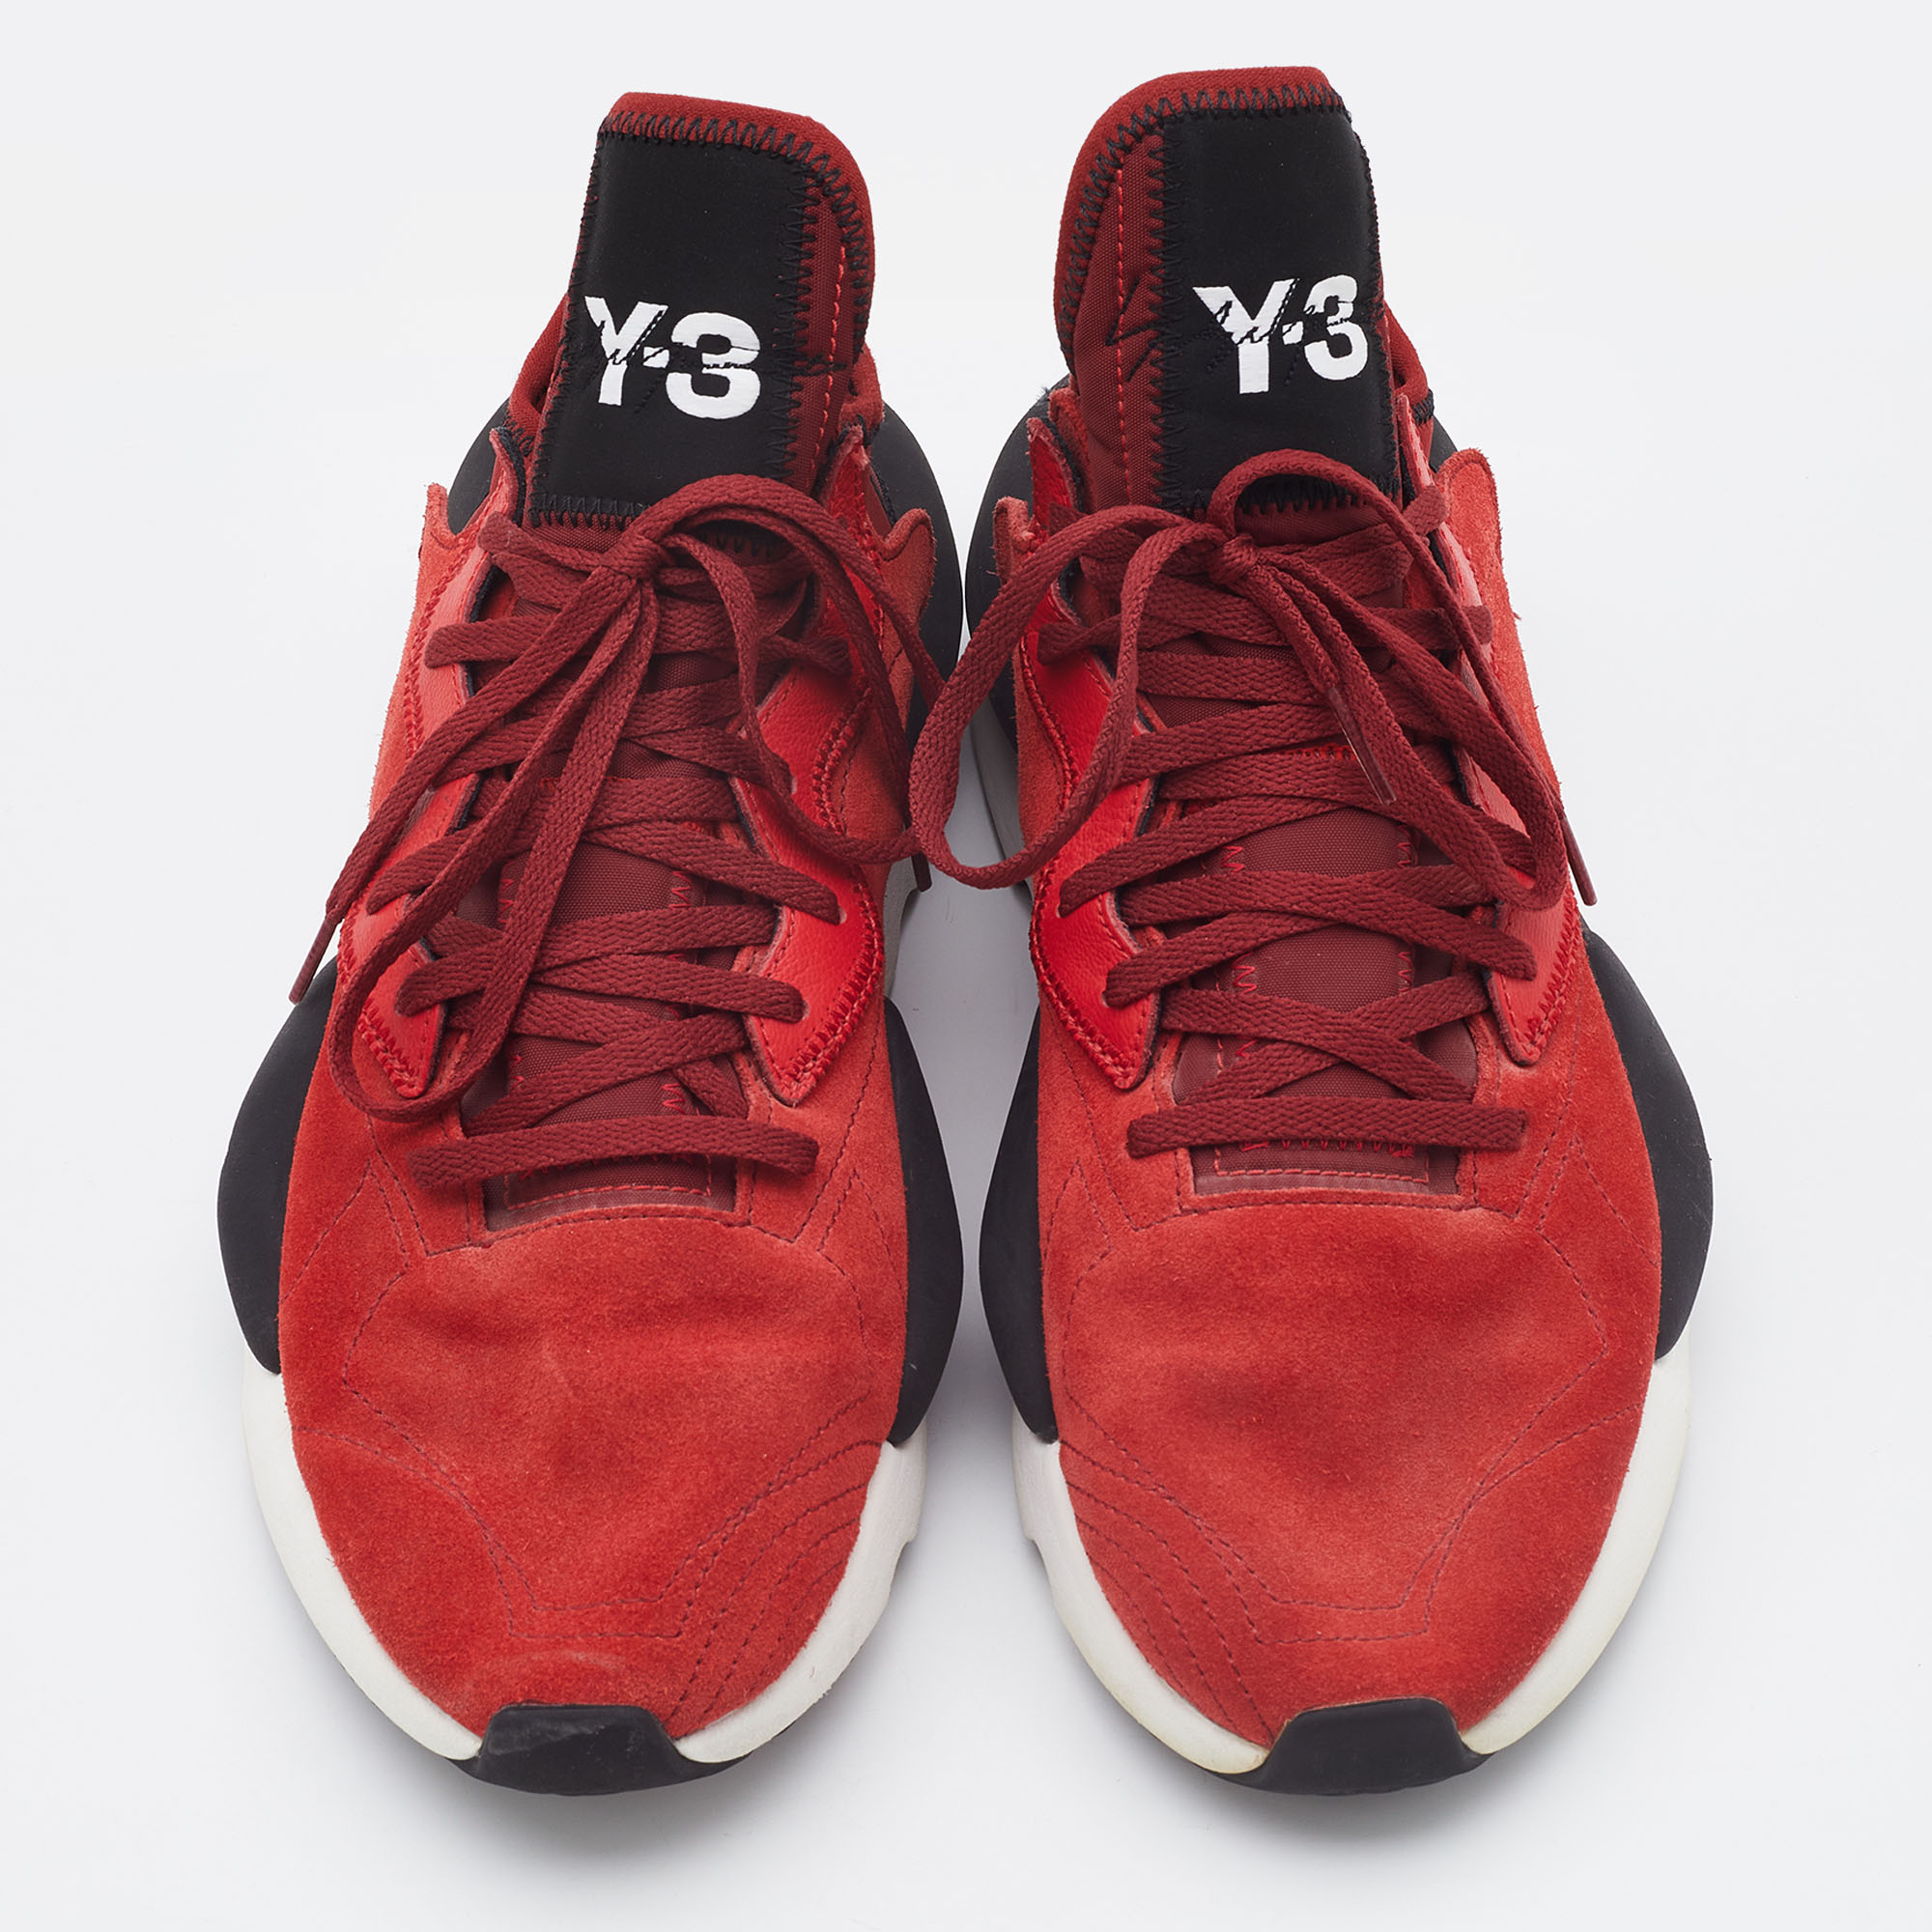 Y-3 Red/Black Suede And Fabric Kaiwa Sneakers Size 43.5